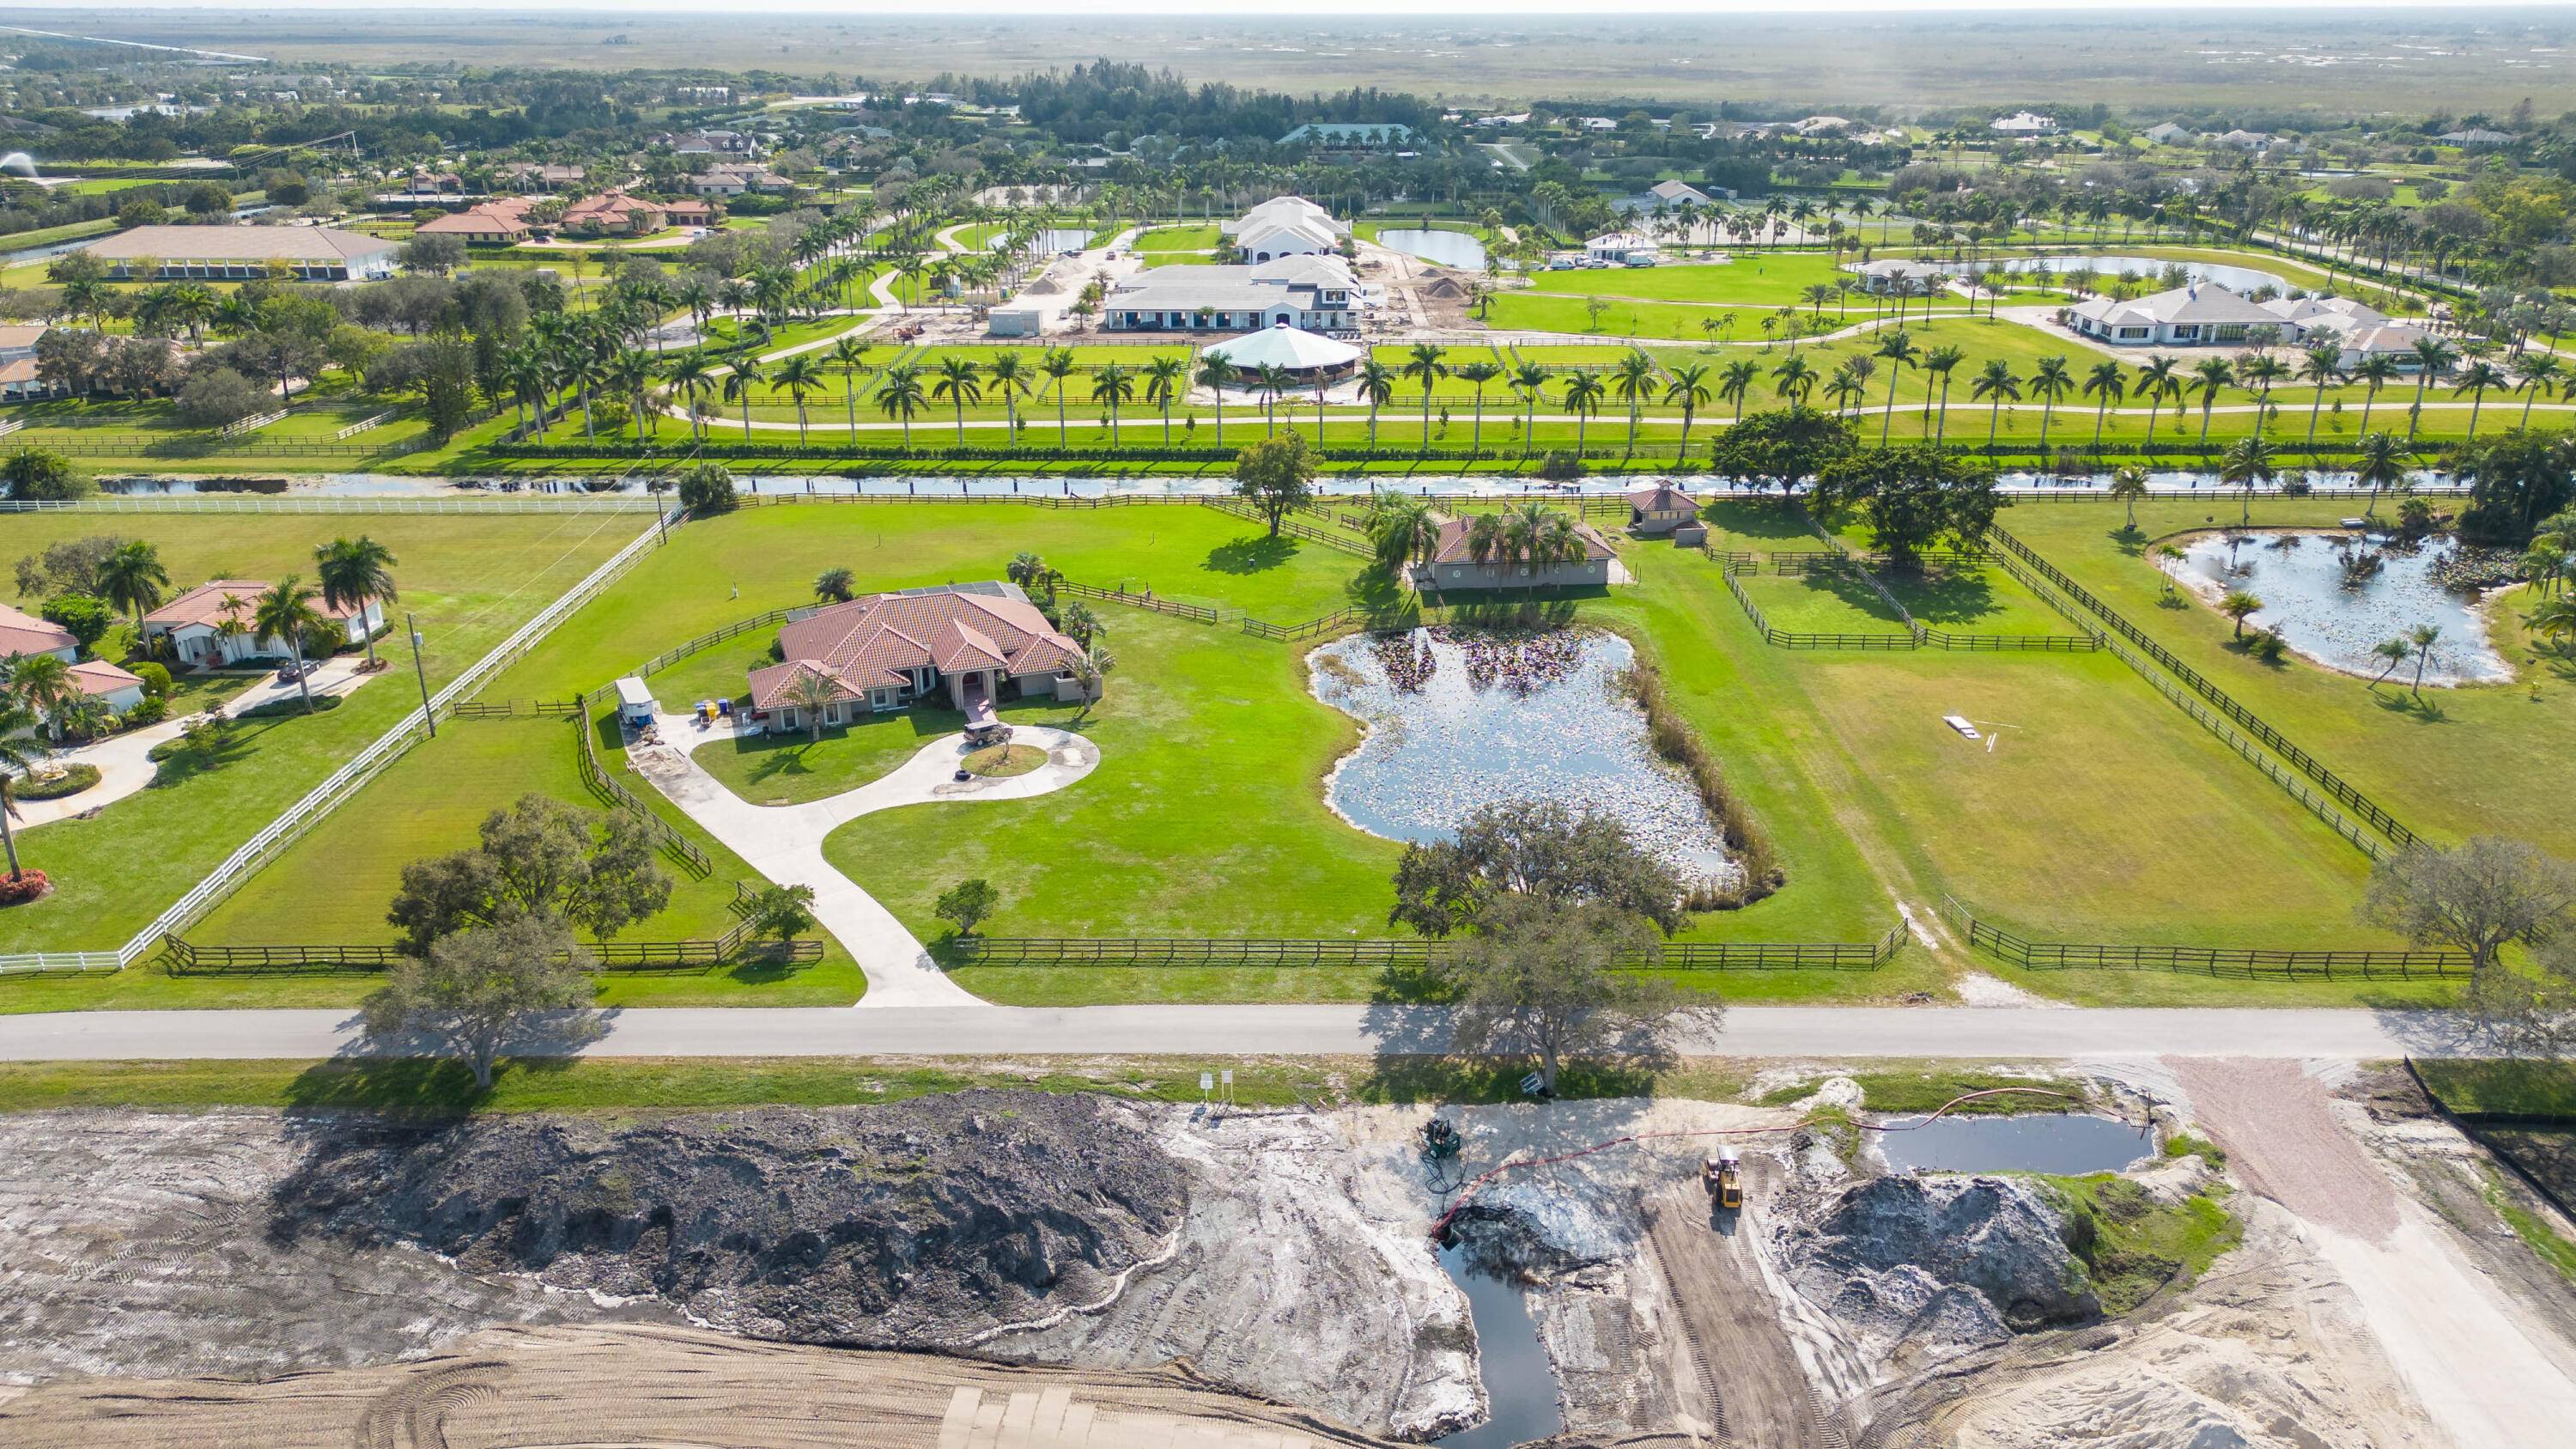 This beautiful horse property boasts an idyllic location on over 5 acres in the coveted equestrian community of Palm Beach Point.